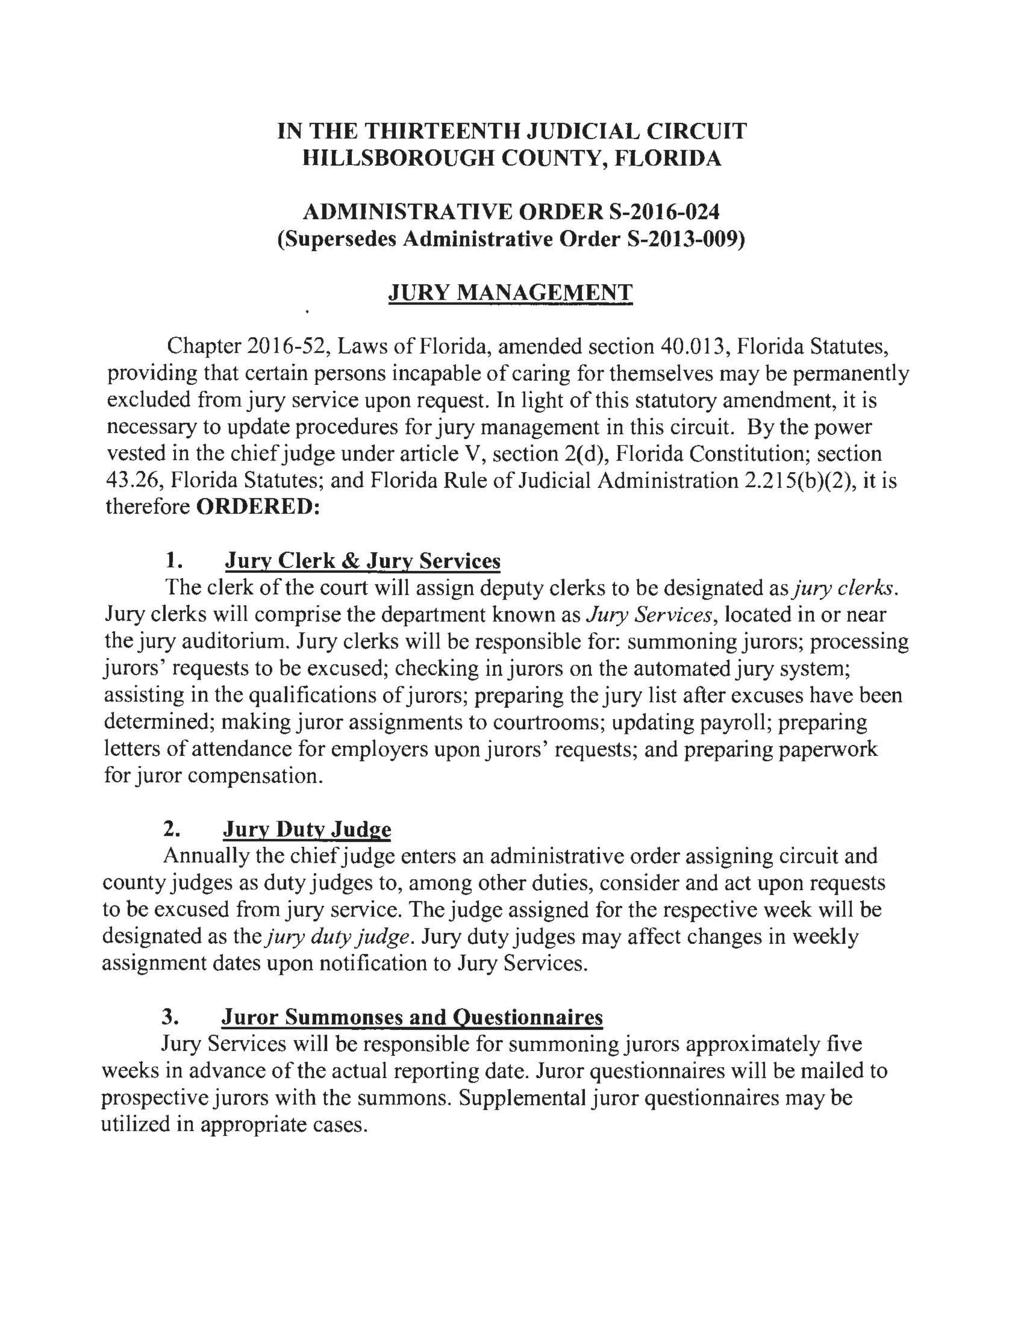 IN THE THIRTEENTH JUDICIAL CIRCUIT HILLSBOROUGH COUNTY, FLORIDA ADMINISTRATIVE ORDER S-2016-024 (Supersedes Administrative Order S-2013-009) JURY MANAGEMENT Chapter 2016-52, Laws of Florida, amended